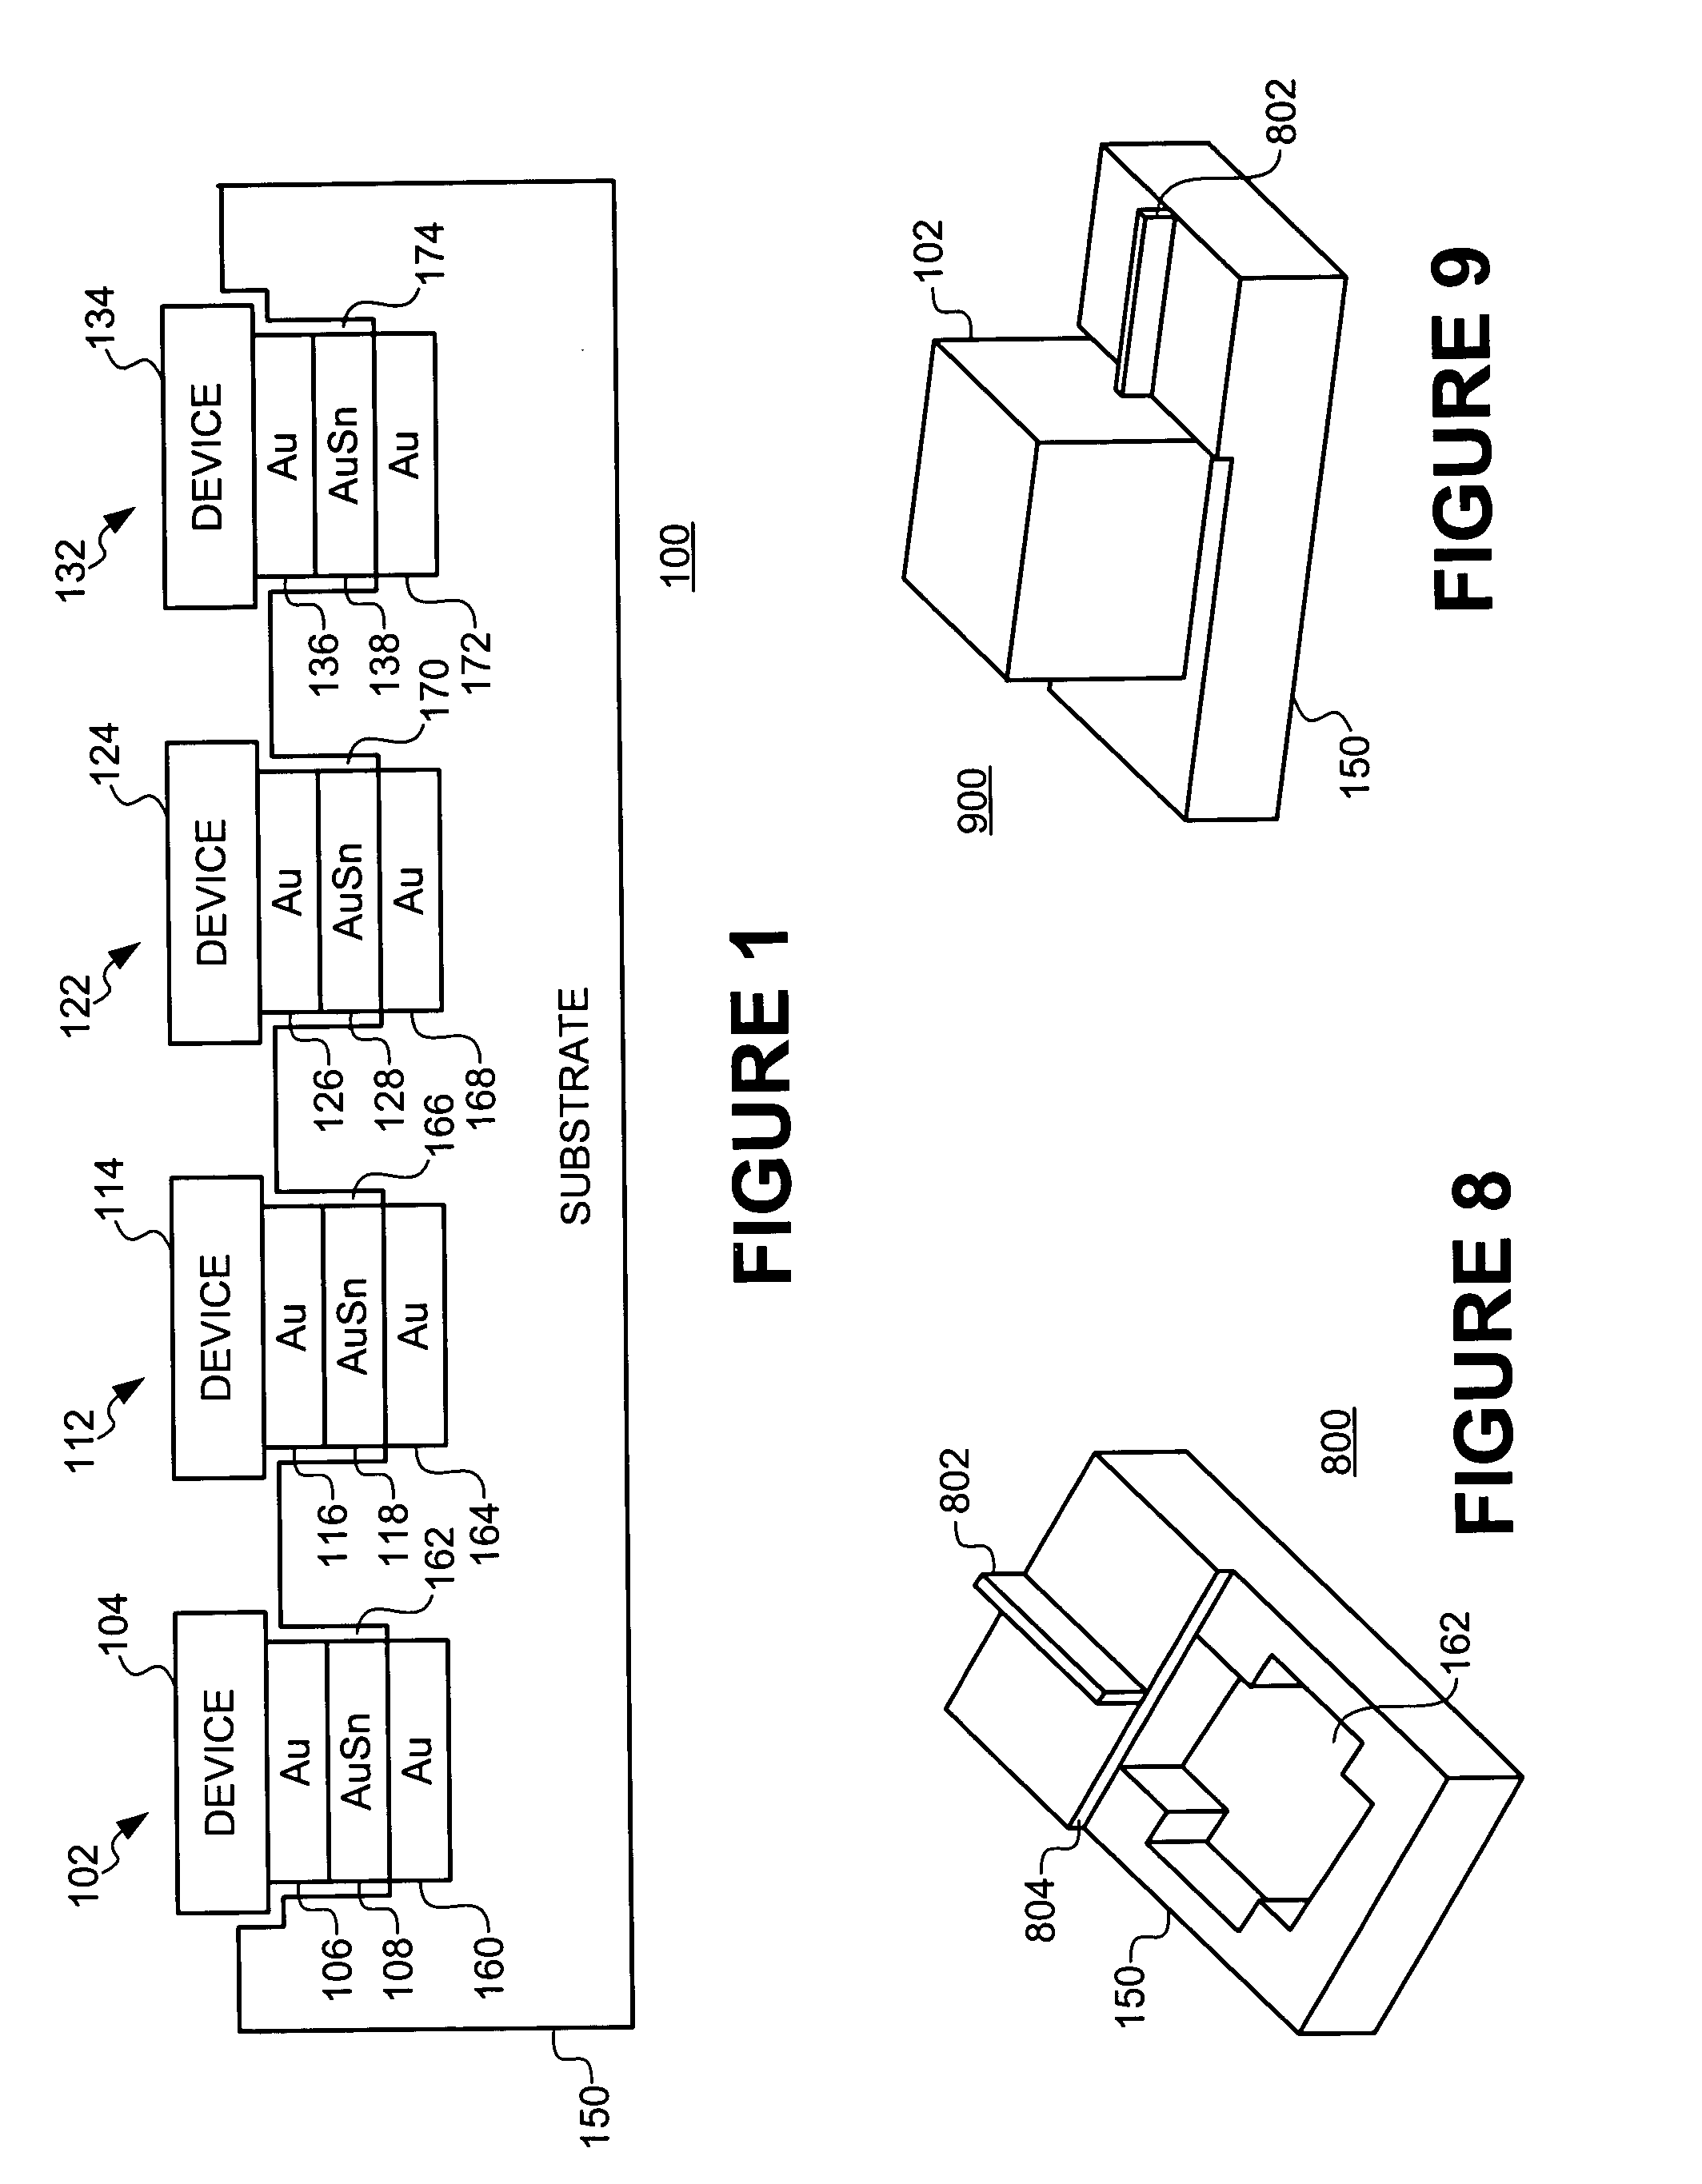 Packaging of multiple active optical devices